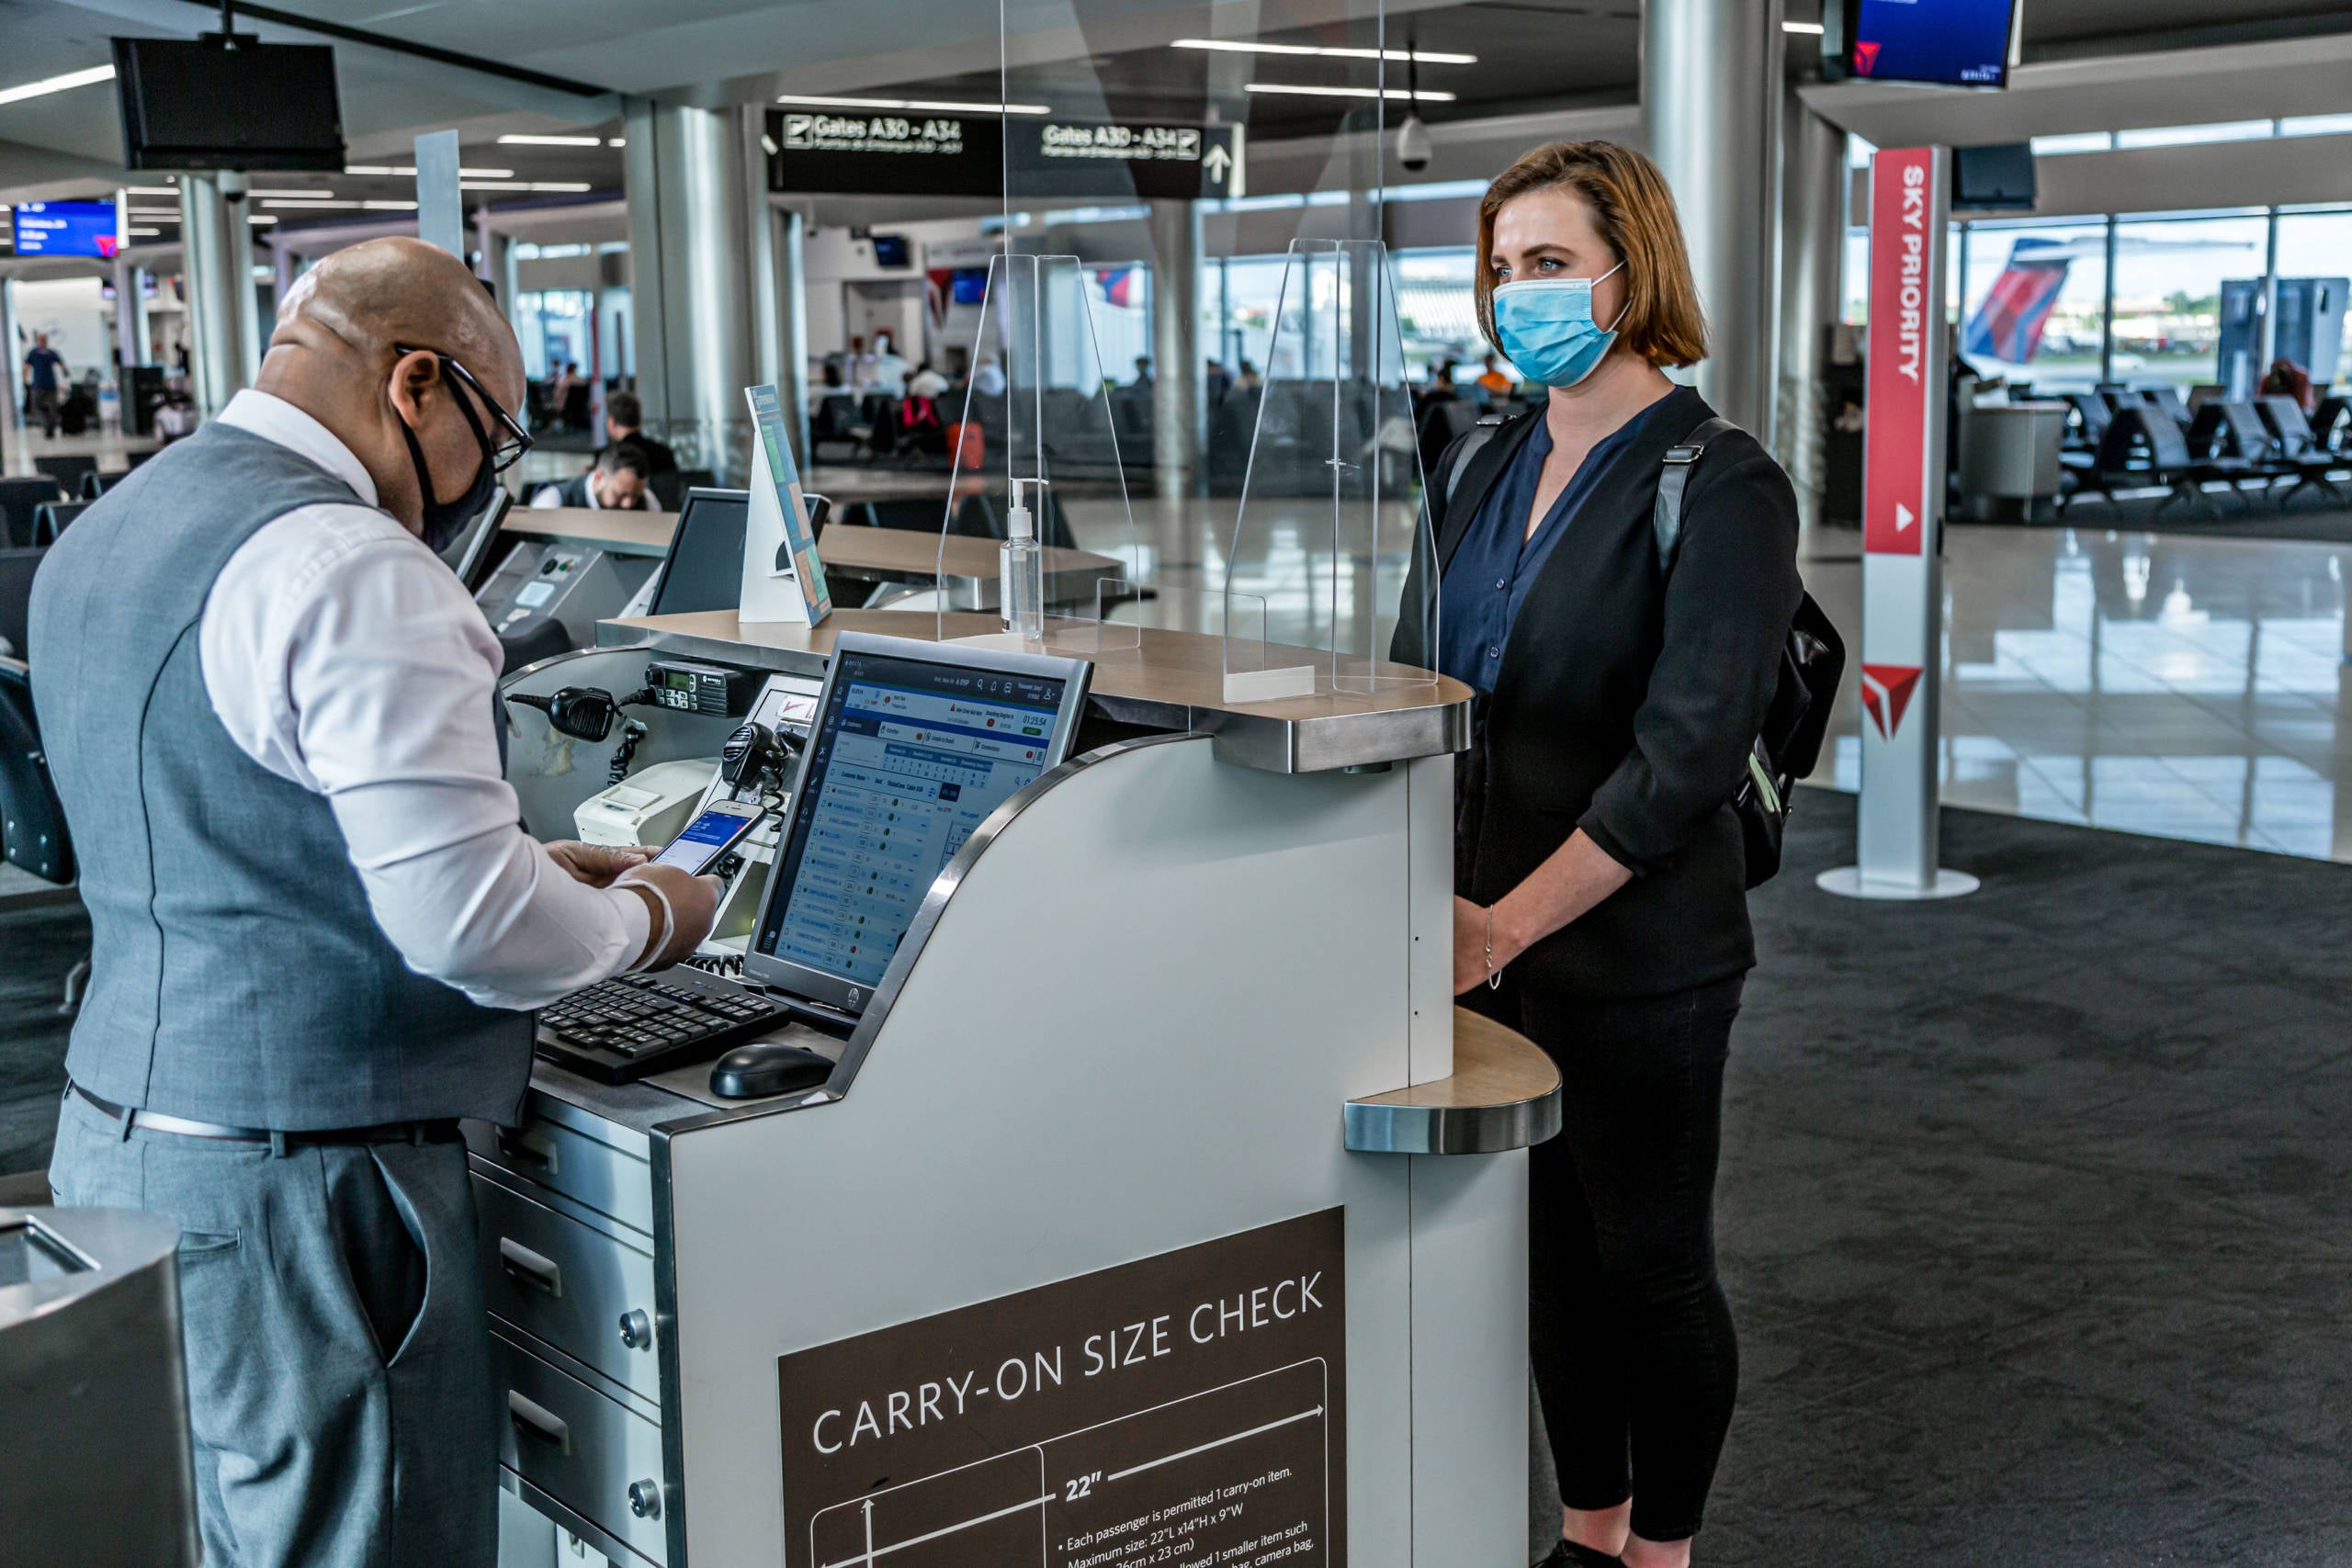 New Delta tool lets passengers upload vaccine cards ahead of their flight